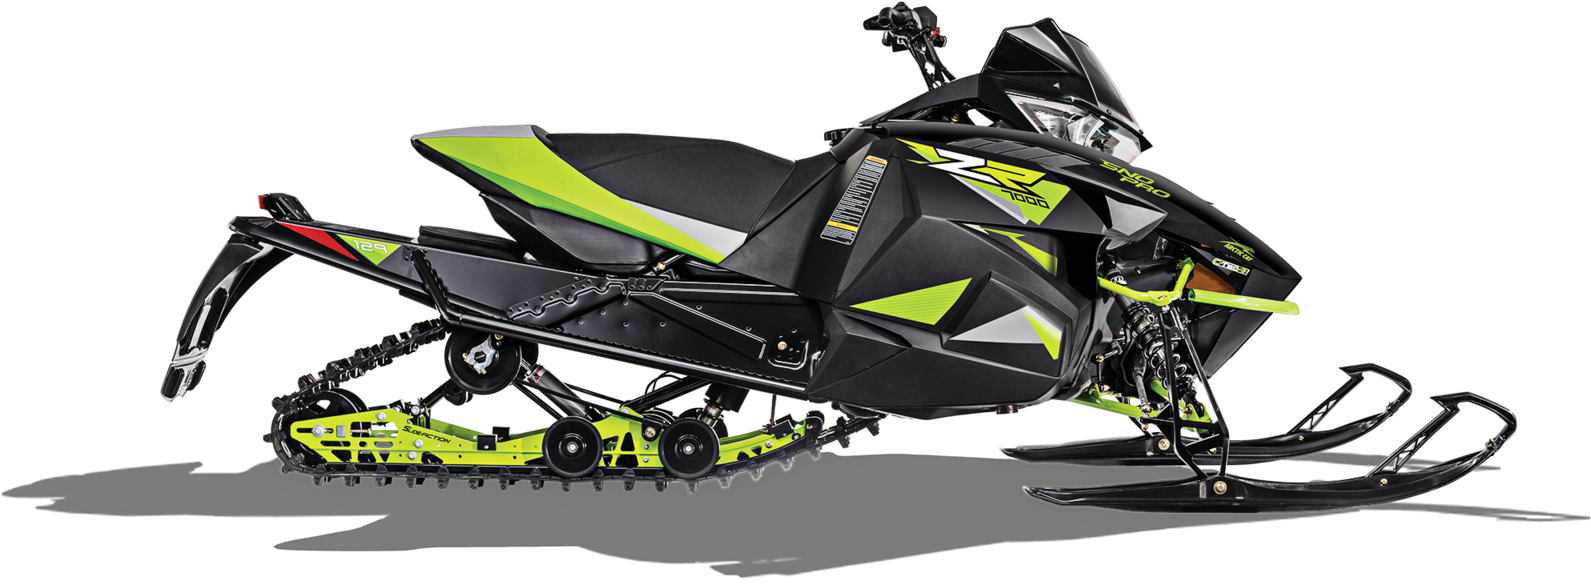 A Black And Green Snowmobile